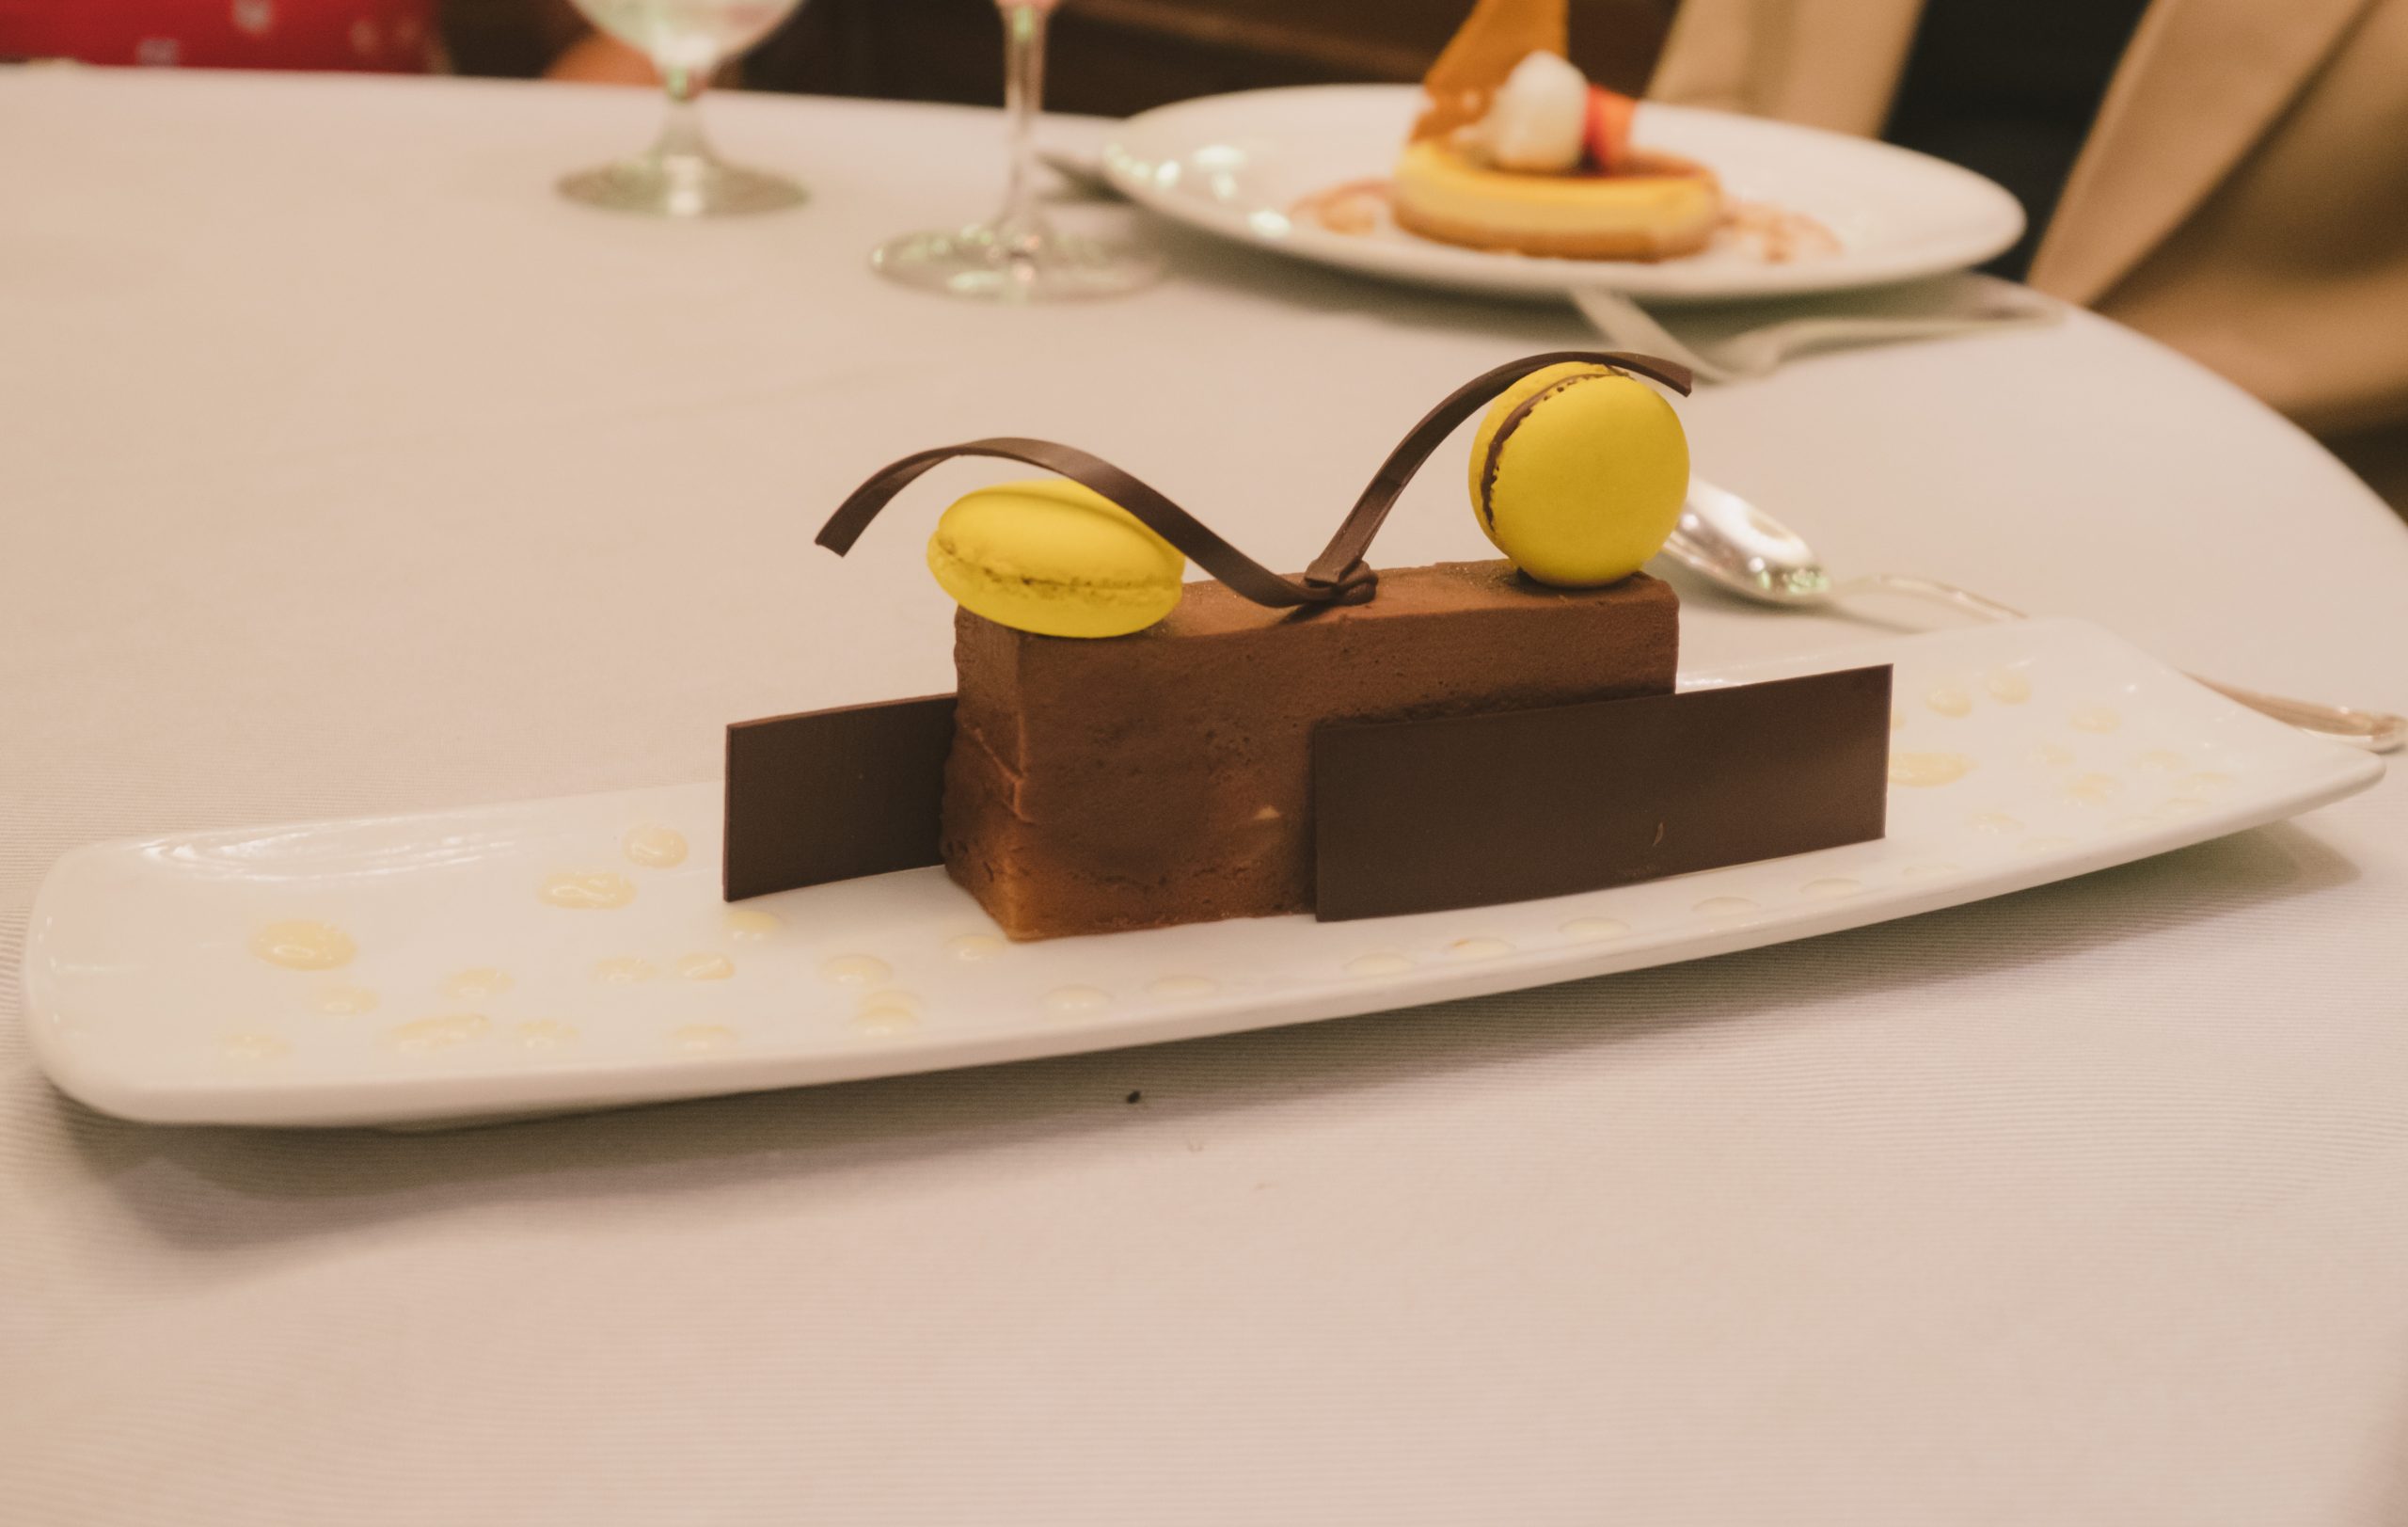 Delicious chocolate desserts on Princess Cruise